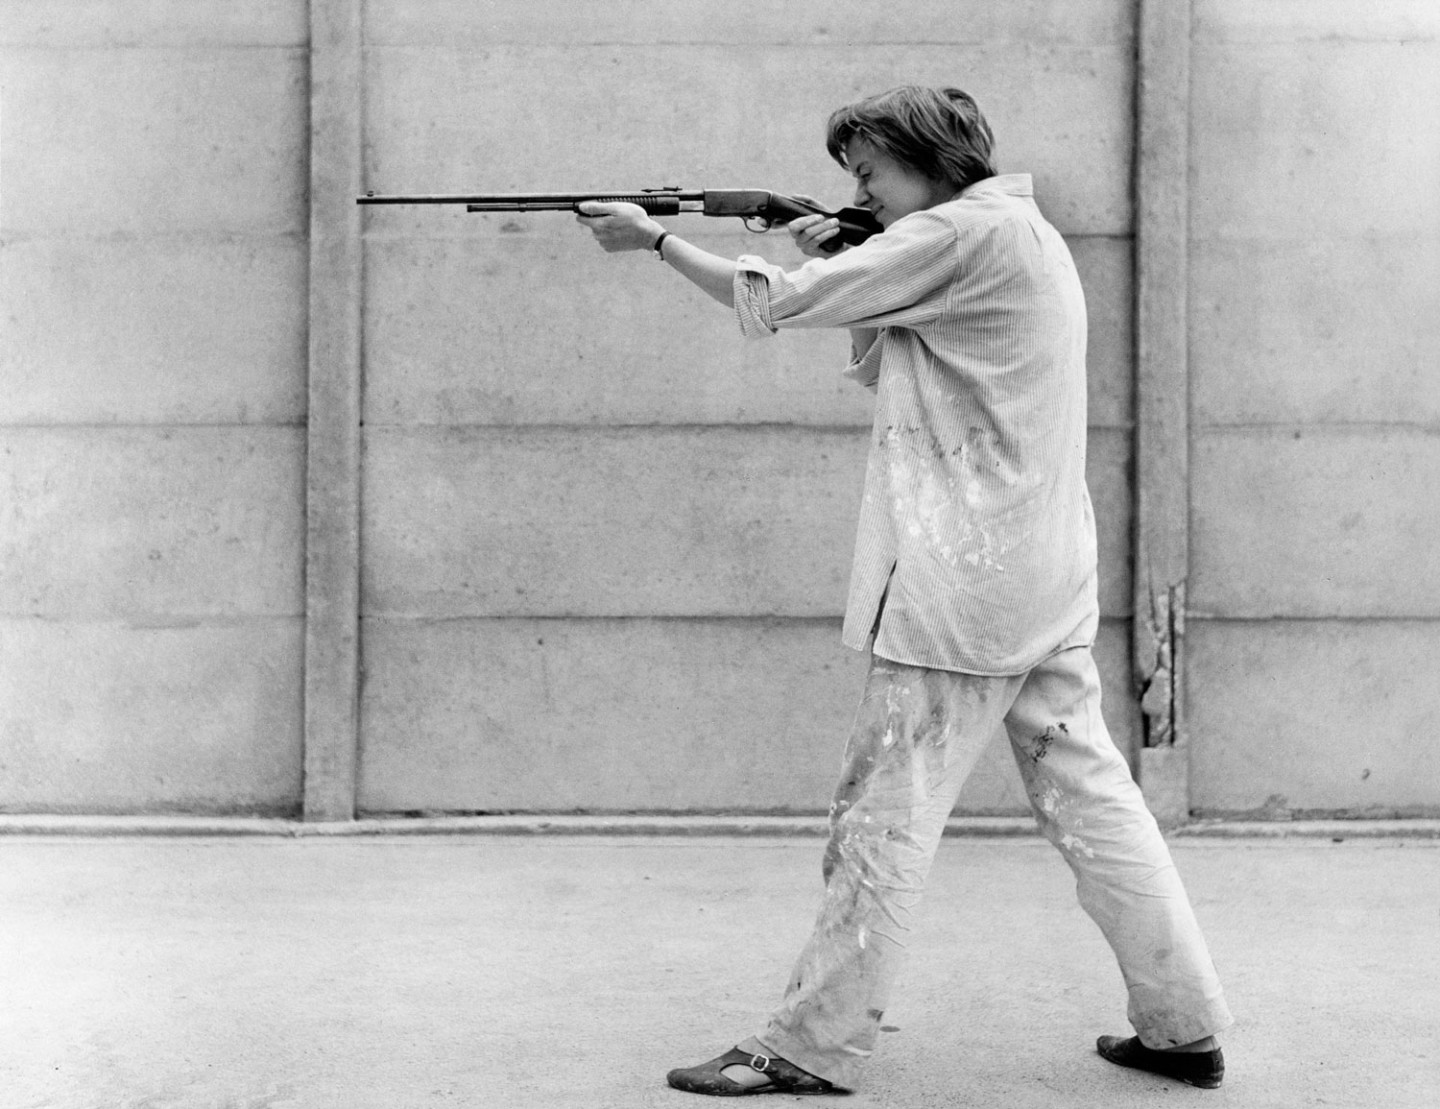 Niki de Saint Phalle shooting at Old Master with a 22 rifle, Impasse Ronsin, June 15